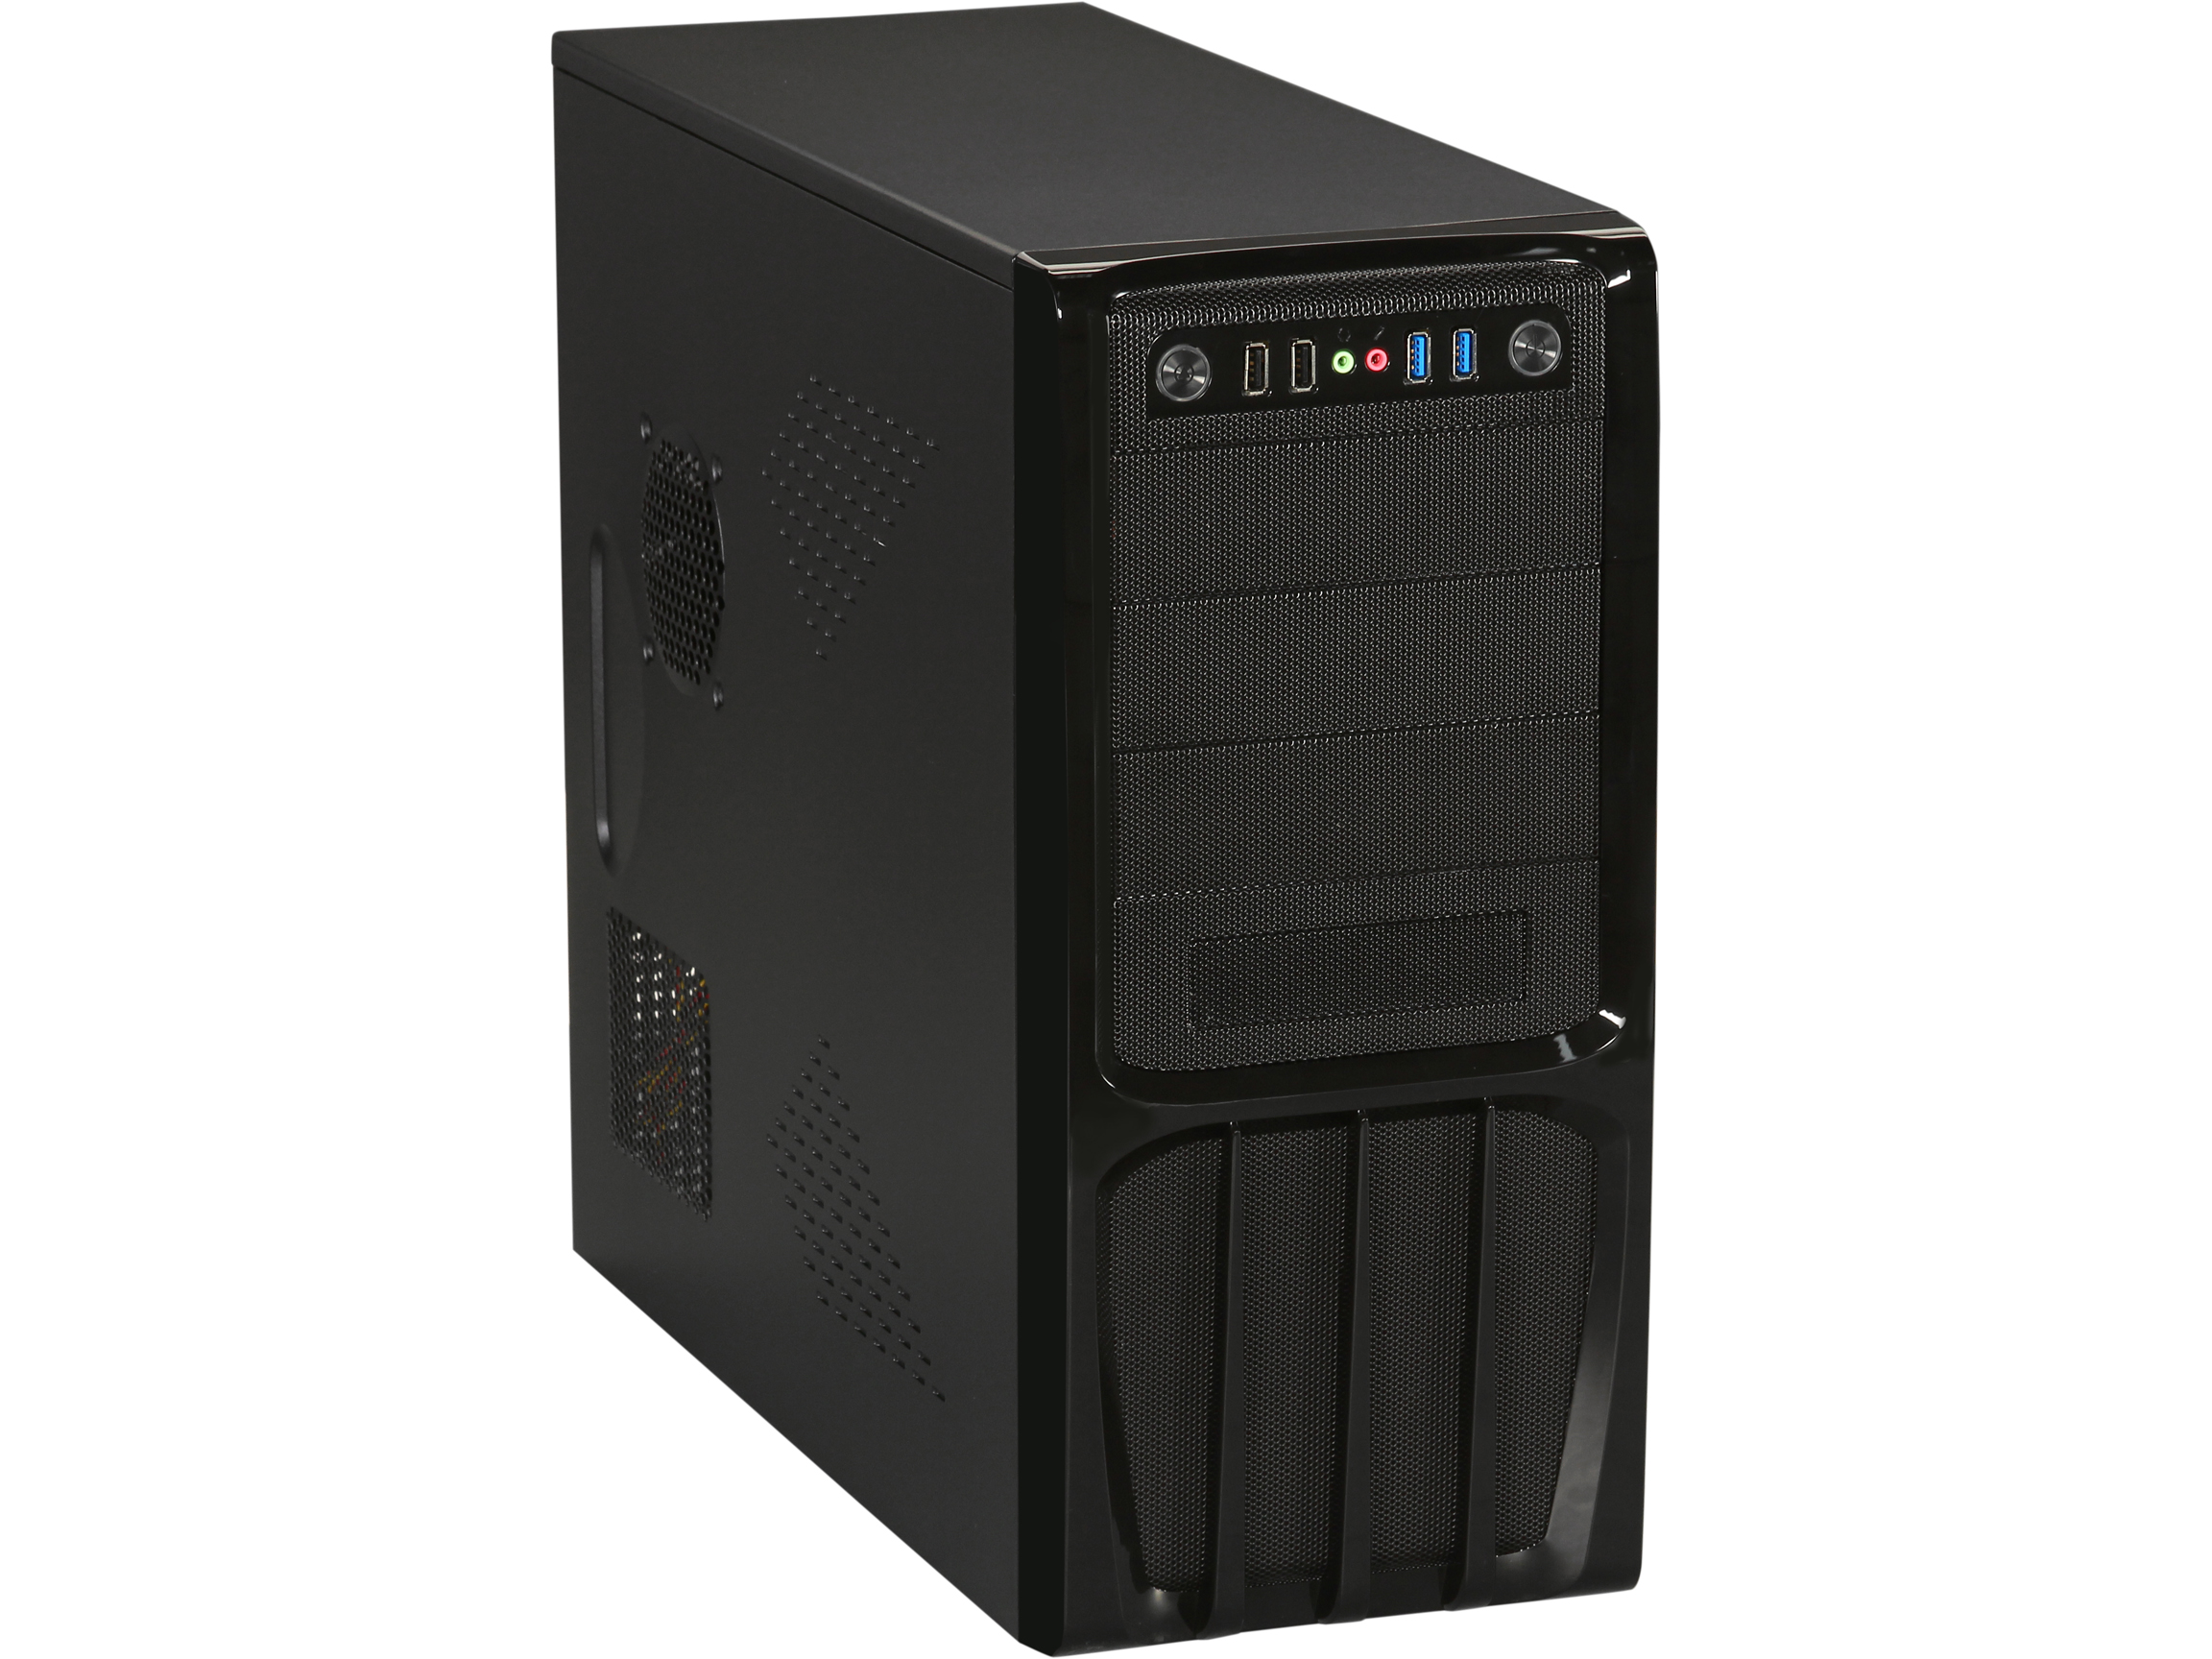 Rosewill R536-BK Black ATX Mid Tower Computer Case with ...